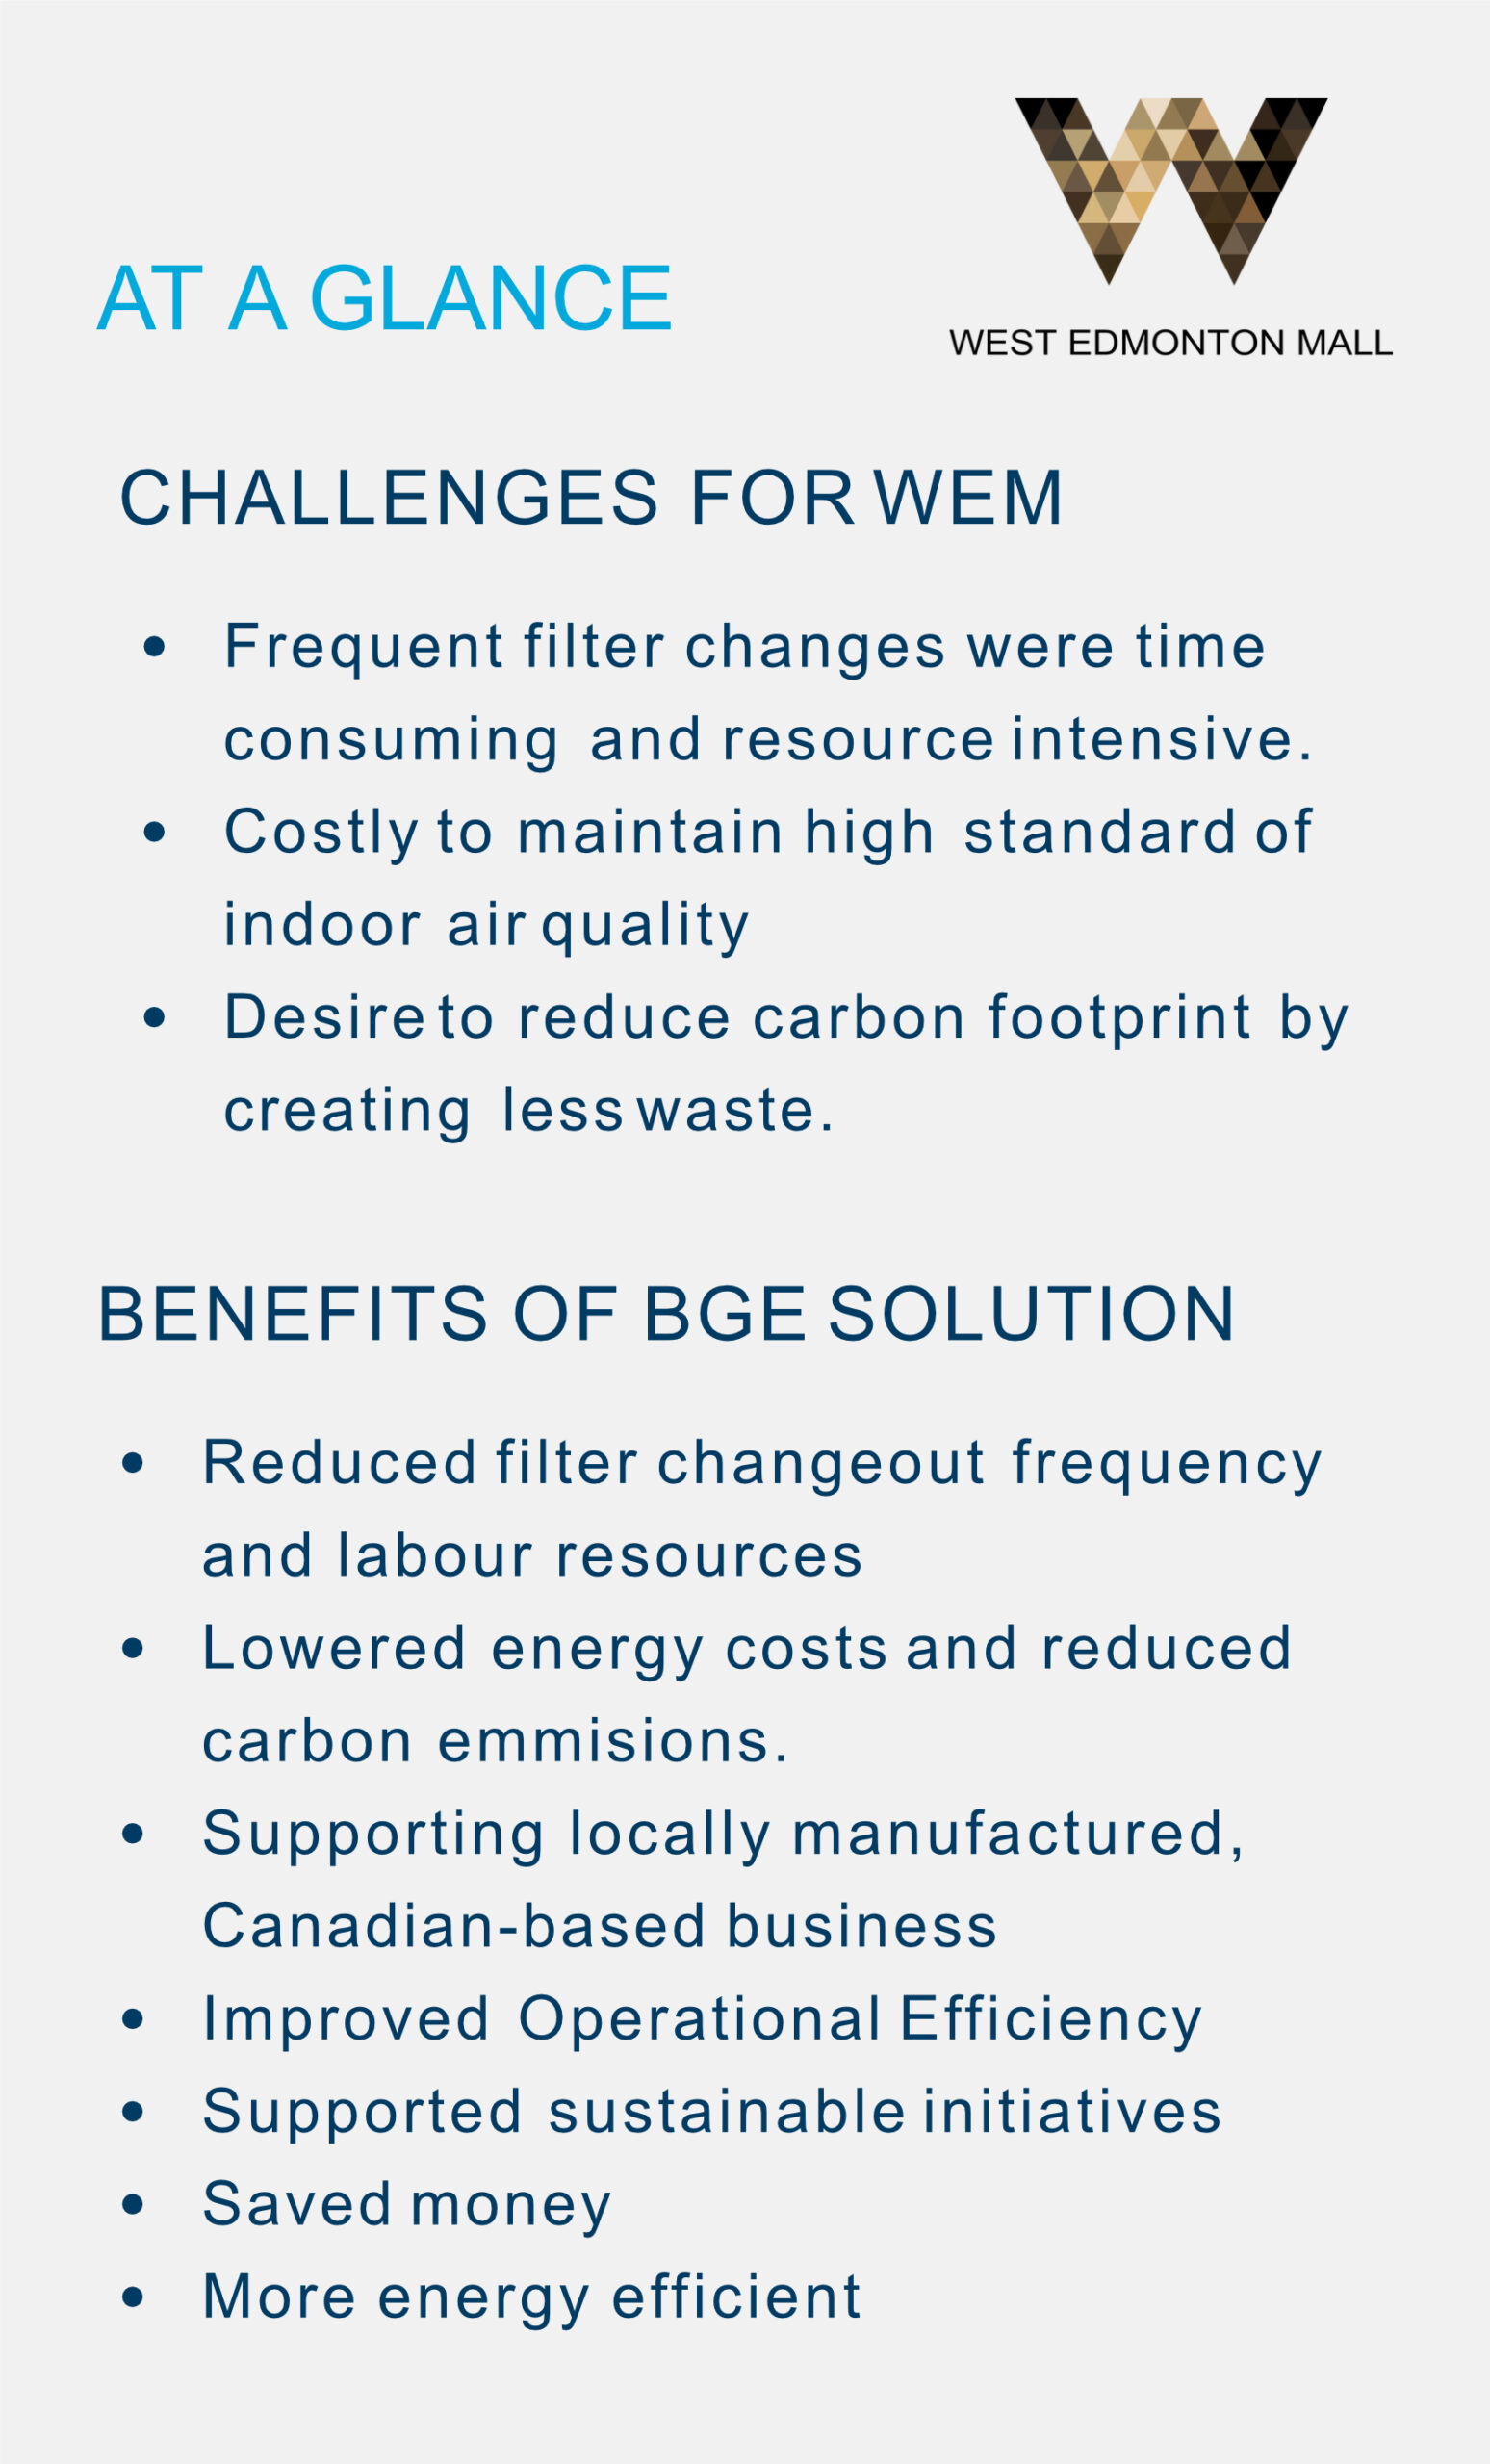 CHALLENGES FOR WEM -Frequent filter changes were time consuming and resource intensive. -Costly to maintain high standard of indoor air quality -Desire to reduce carbon footprint by creating less waste. BENEFITS OF BGE SOLUTION -Reduced filter changeout frequency and labor resources -Lowered energy costs and reduced carbon emissions. -Supporting locally manufactured, Canadian-based business -Improved Operational Efficiency -Supported sustainable initiatives -Saved money -More energy efficient